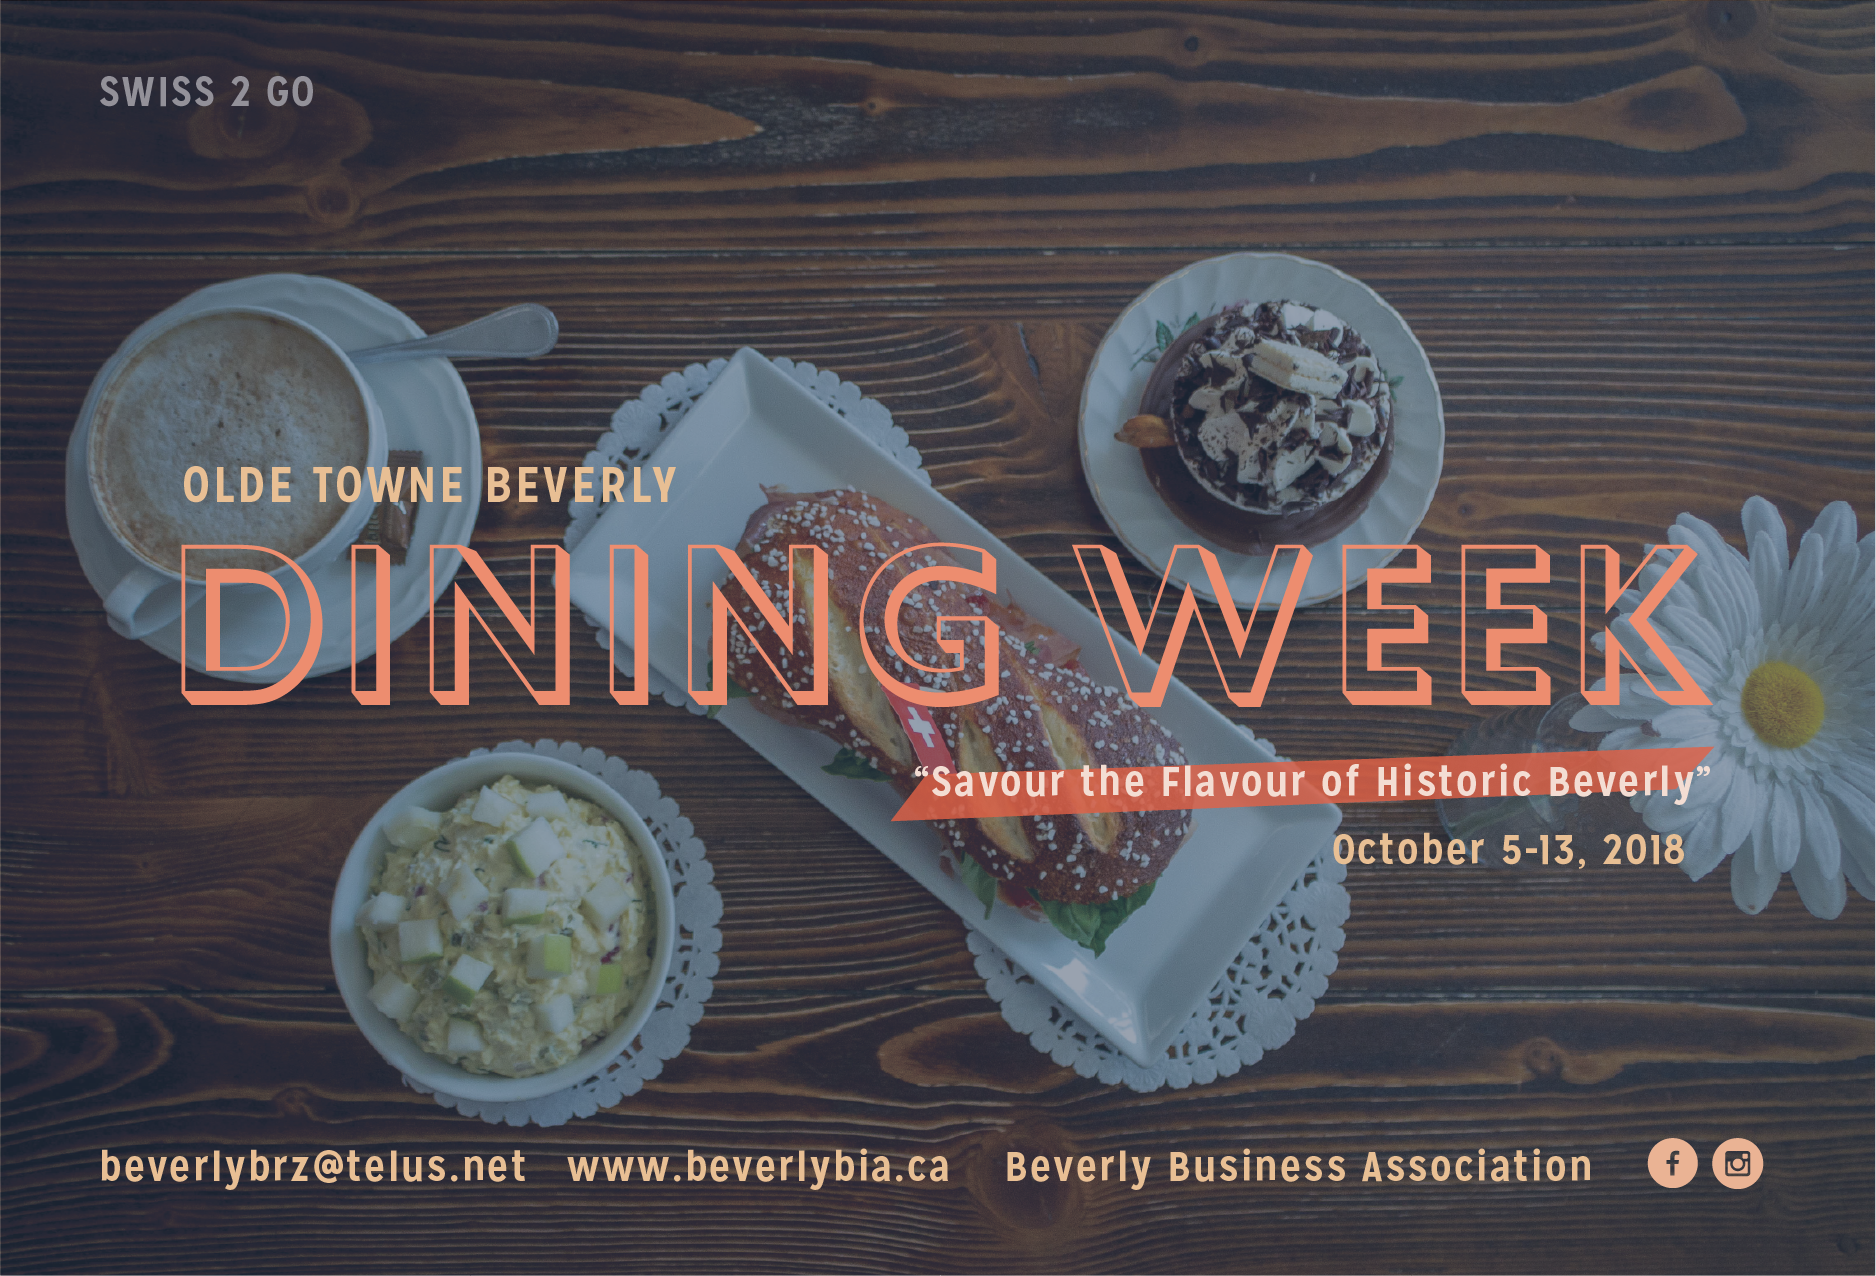  Brand creation and a full marketing campaign for Beverly Business Association to launch their new initiative “Beverly Dining Week”. The event is to increase patronage and awareness of what Beverly has to offer and remove the stigma that Beverly is a